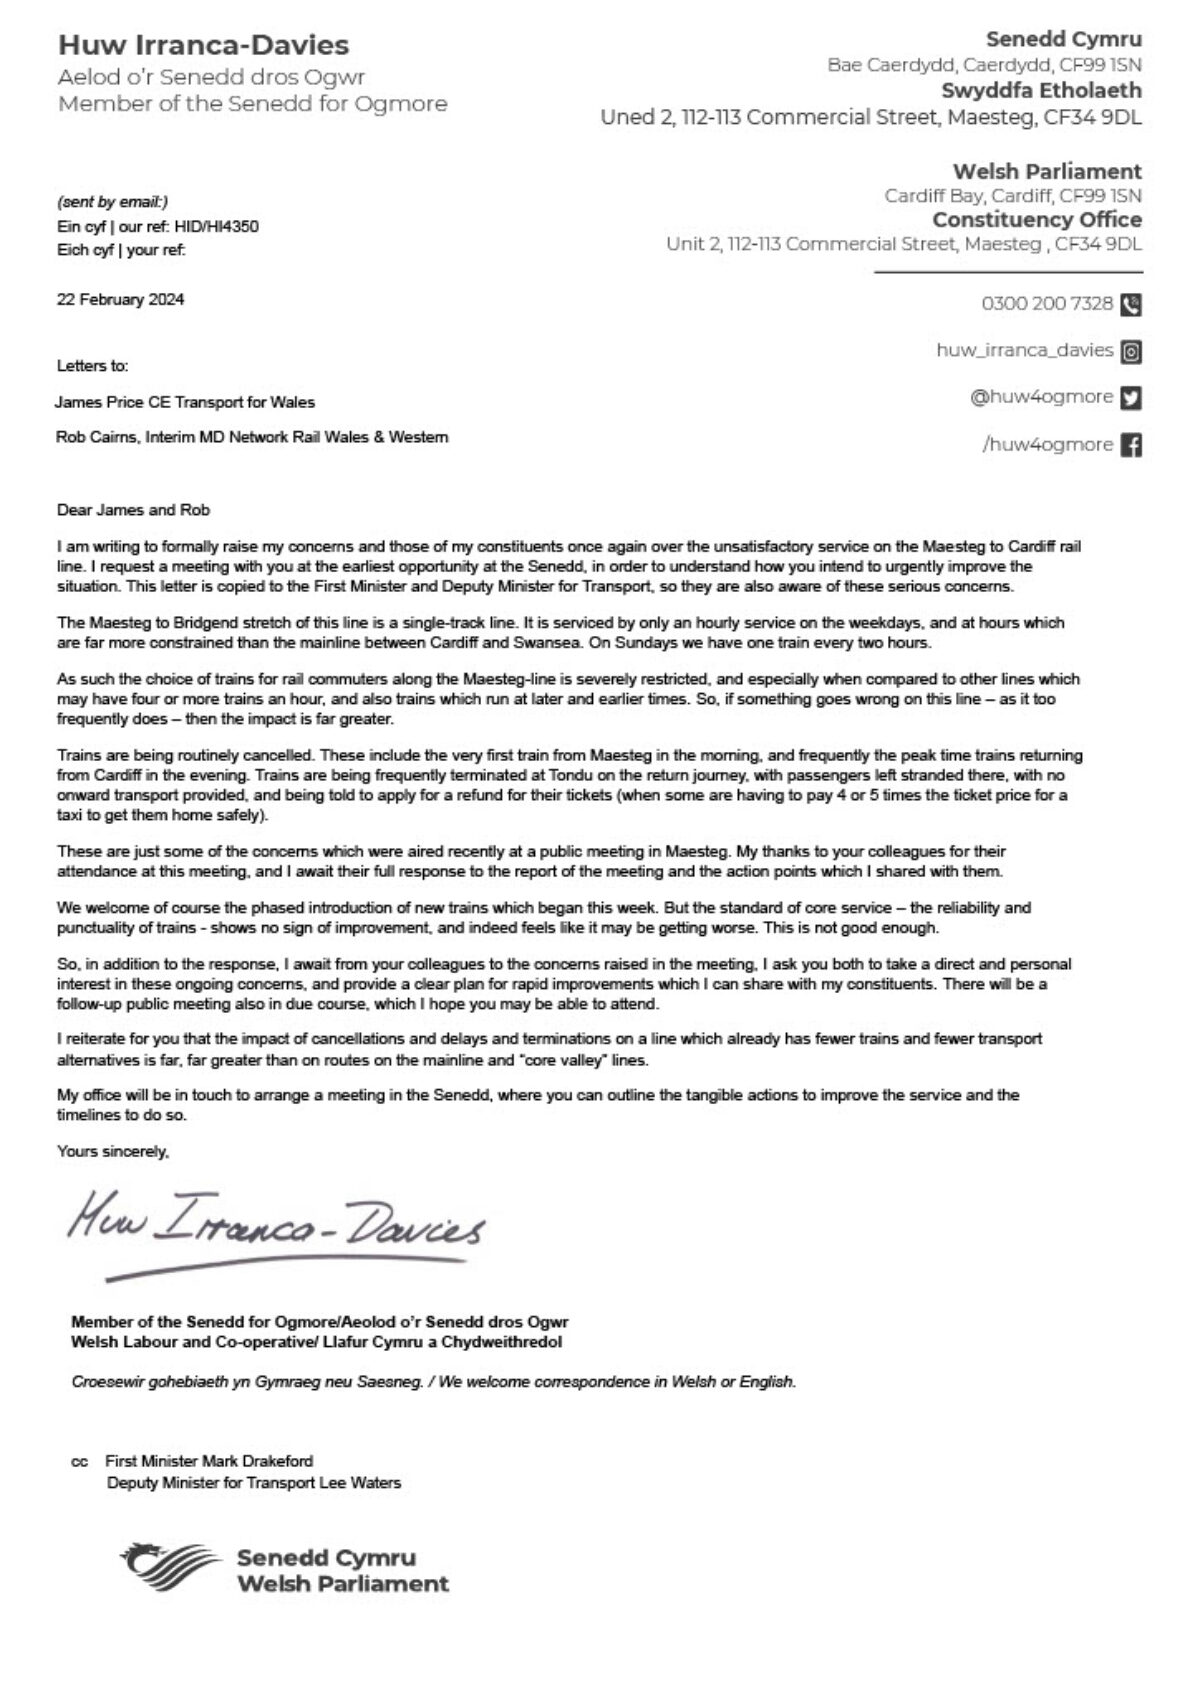 Letter from Huw Irranca-Davies MS 